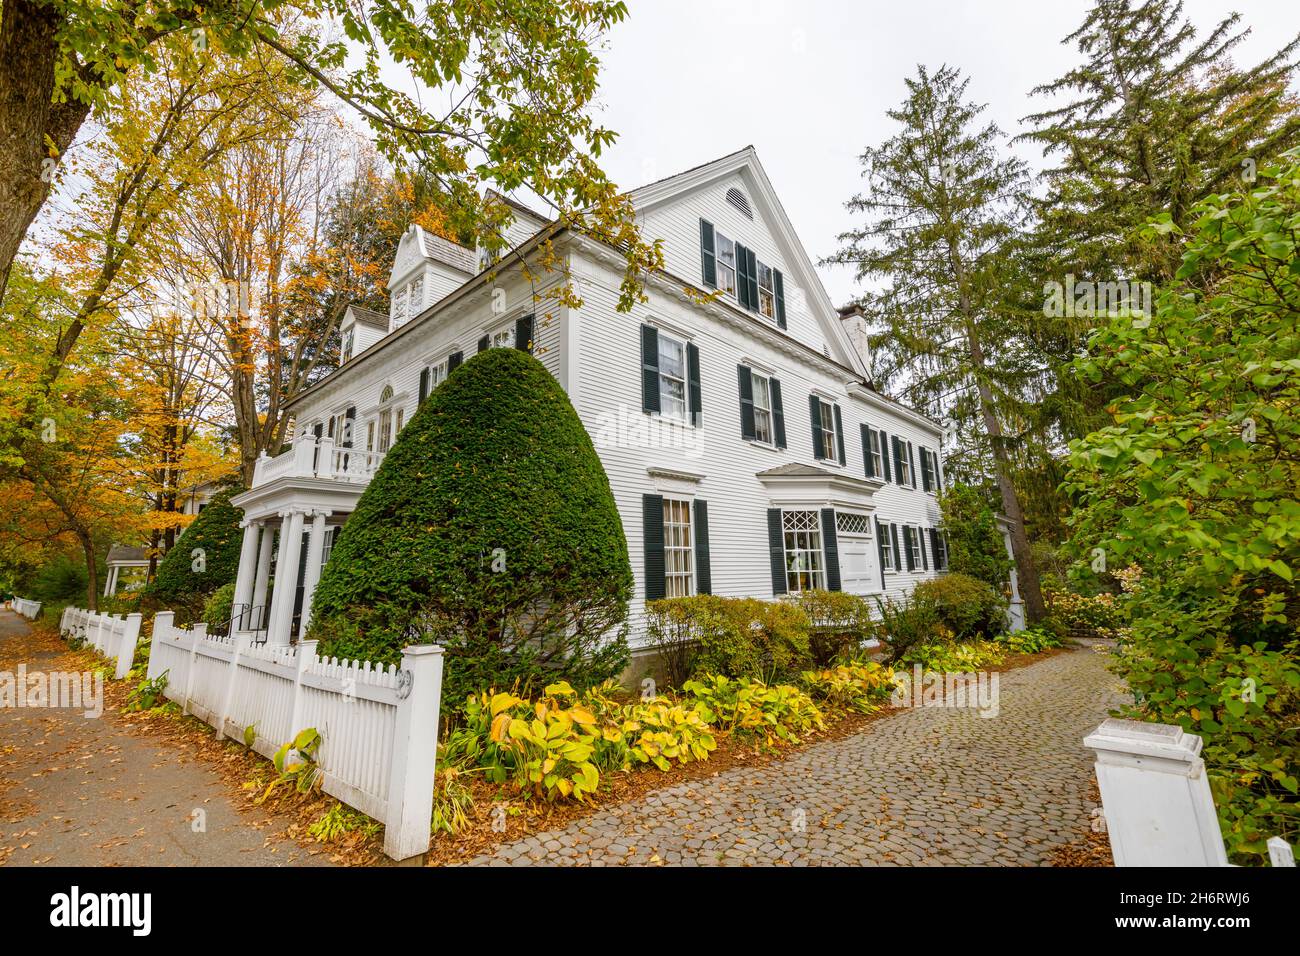 Typical local style large white clapboard faced house in Woodstock, Vermont, New England, USA Stock Photo